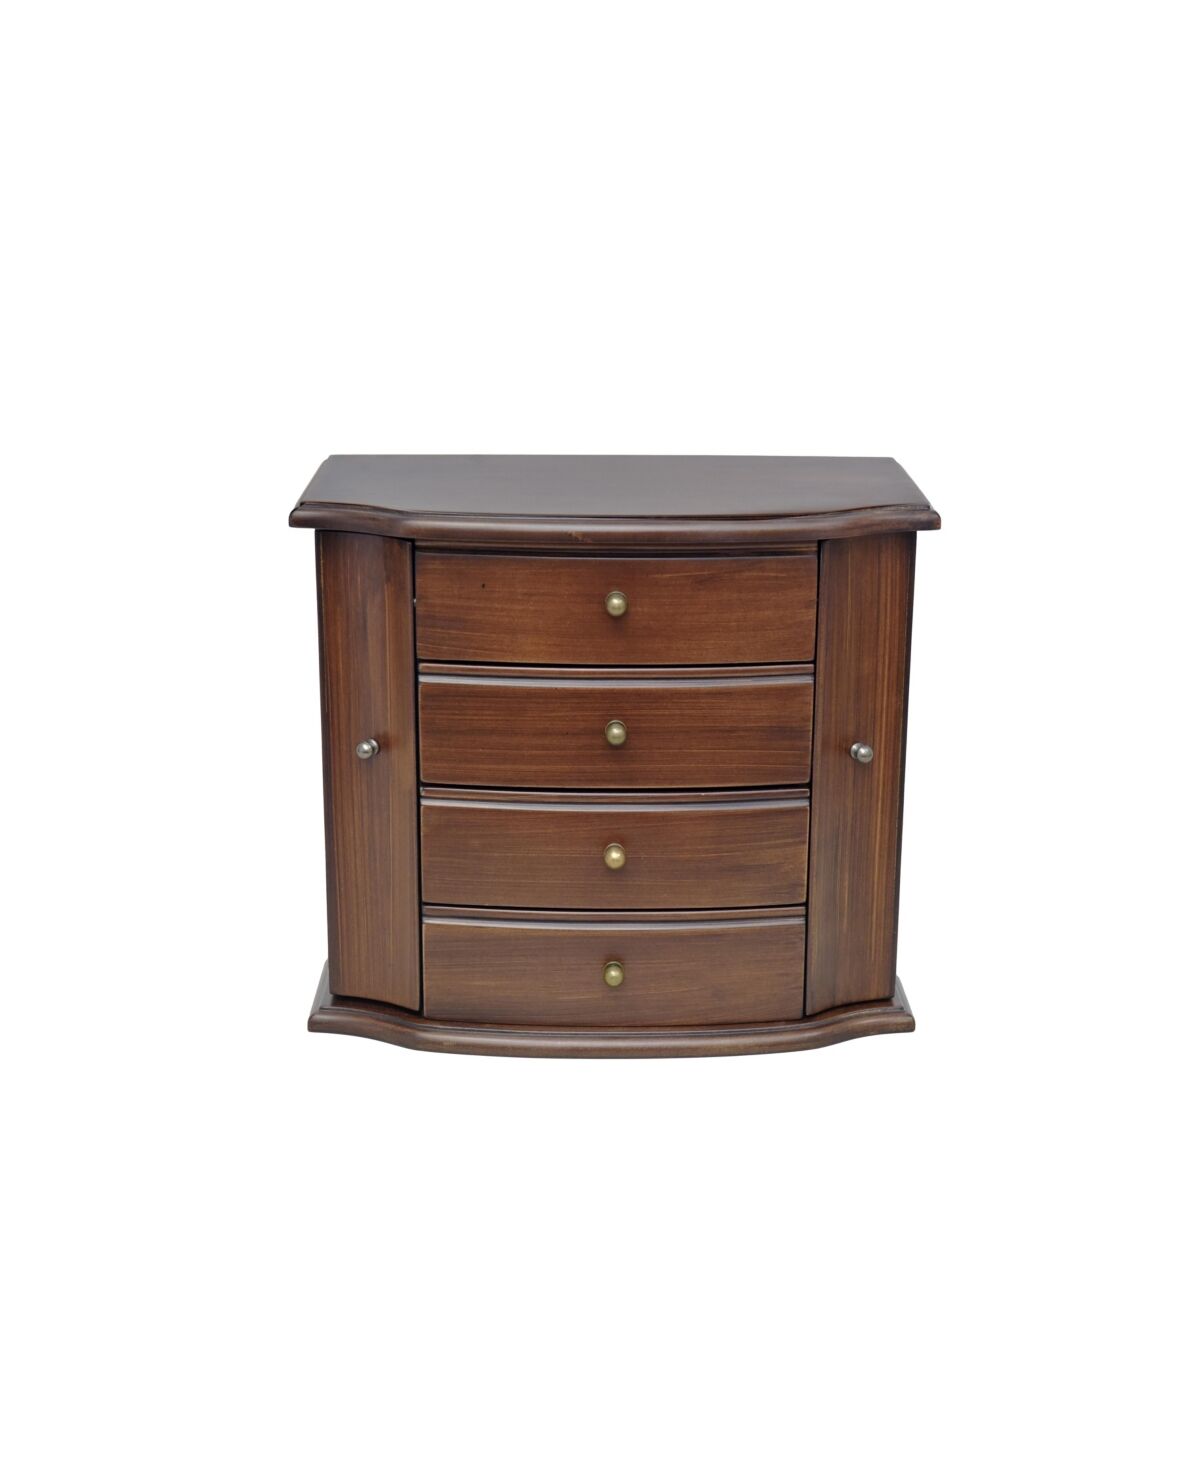 Pko Inc. Traditional Brushed Jewelry Box - Brown